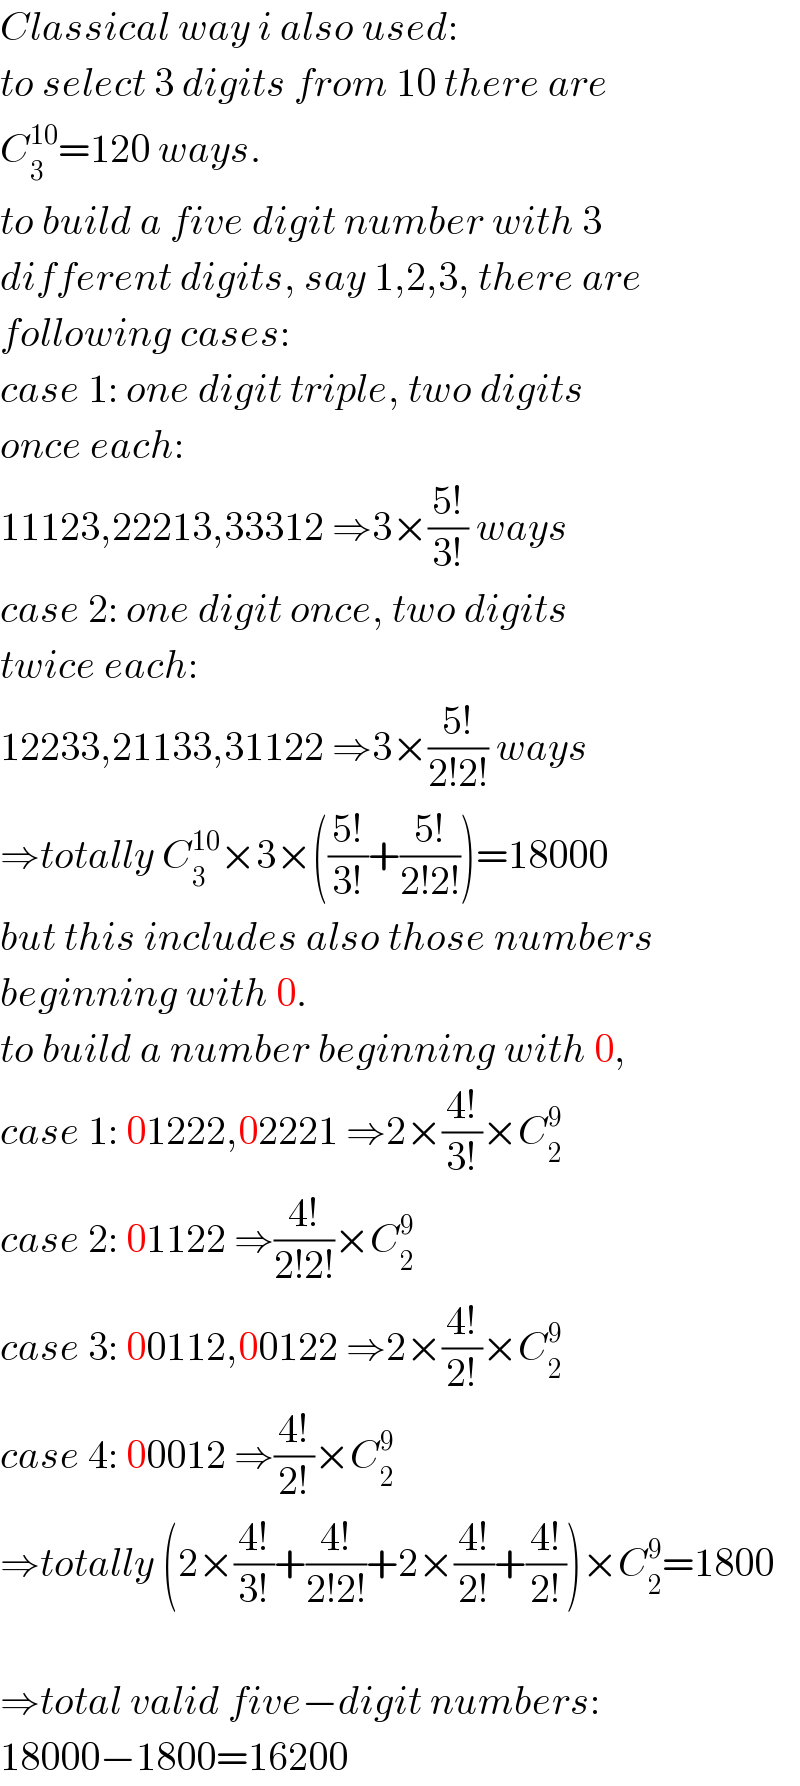 Classical way i also used:  to select 3 digits from 10 there are  C_3 ^(10) =120 ways.  to build a five digit number with 3  different digits, say 1,2,3, there are  following cases:  case 1: one digit triple, two digits   once each:  11123,22213,33312 ⇒3×((5!)/(3!)) ways  case 2: one digit once, two digits   twice each:  12233,21133,31122 ⇒3×((5!)/(2!2!)) ways  ⇒totally C_3 ^(10) ×3×(((5!)/(3!))+((5!)/(2!2!)))=18000  but this includes also those numbers  beginning with 0.  to build a number beginning with 0,  case 1: 01222,02221 ⇒2×((4!)/(3!))×C_2 ^9   case 2: 01122 ⇒((4!)/(2!2!))×C_2 ^9   case 3: 00112,00122 ⇒2×((4!)/(2!))×C_2 ^9   case 4: 00012 ⇒((4!)/(2!))×C_2 ^9   ⇒totally (2×((4!)/(3!))+((4!)/(2!2!))+2×((4!)/(2!))+((4!)/(2!)))×C_2 ^9 =1800    ⇒total valid five−digit numbers:  18000−1800=16200  